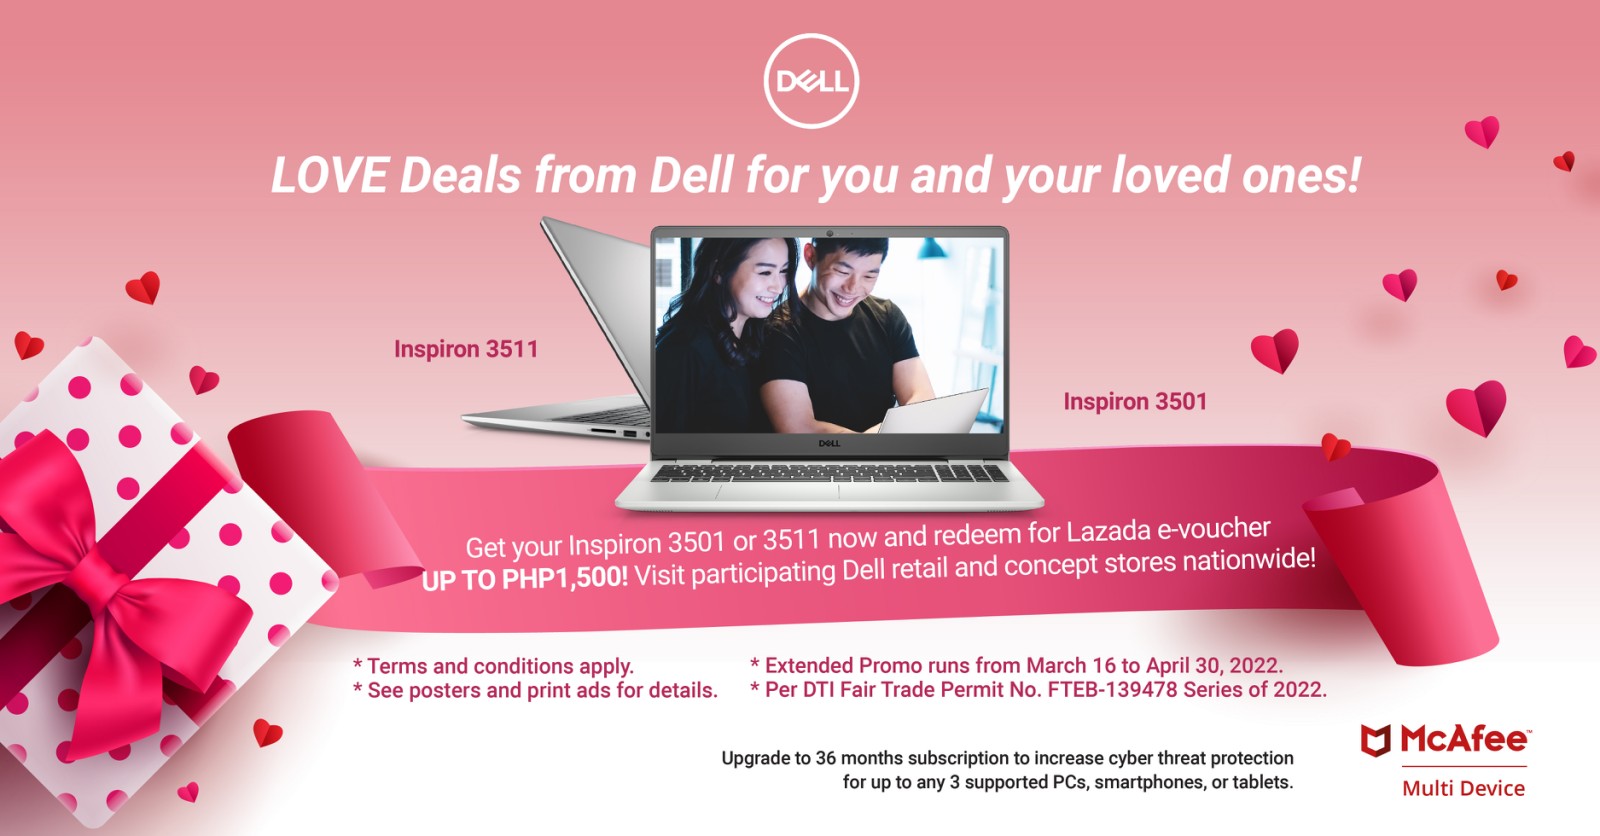 Love Deals From Dell